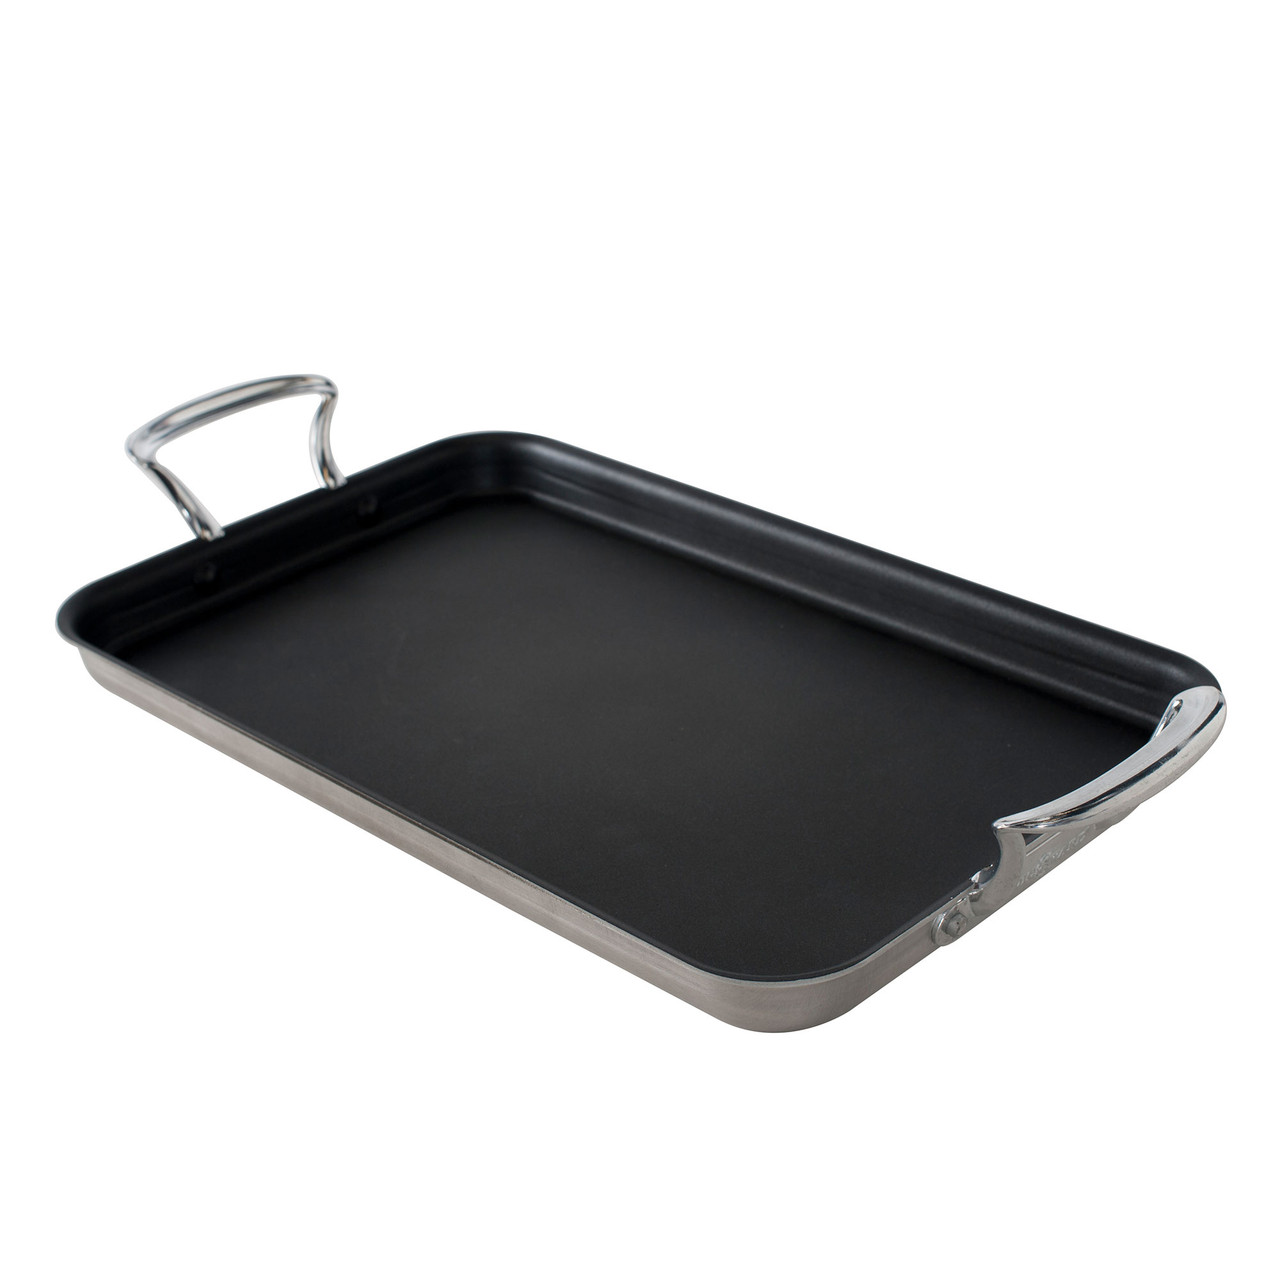 Nordic Ware Prism Textured Aluminum High Sided Baking Pan - World